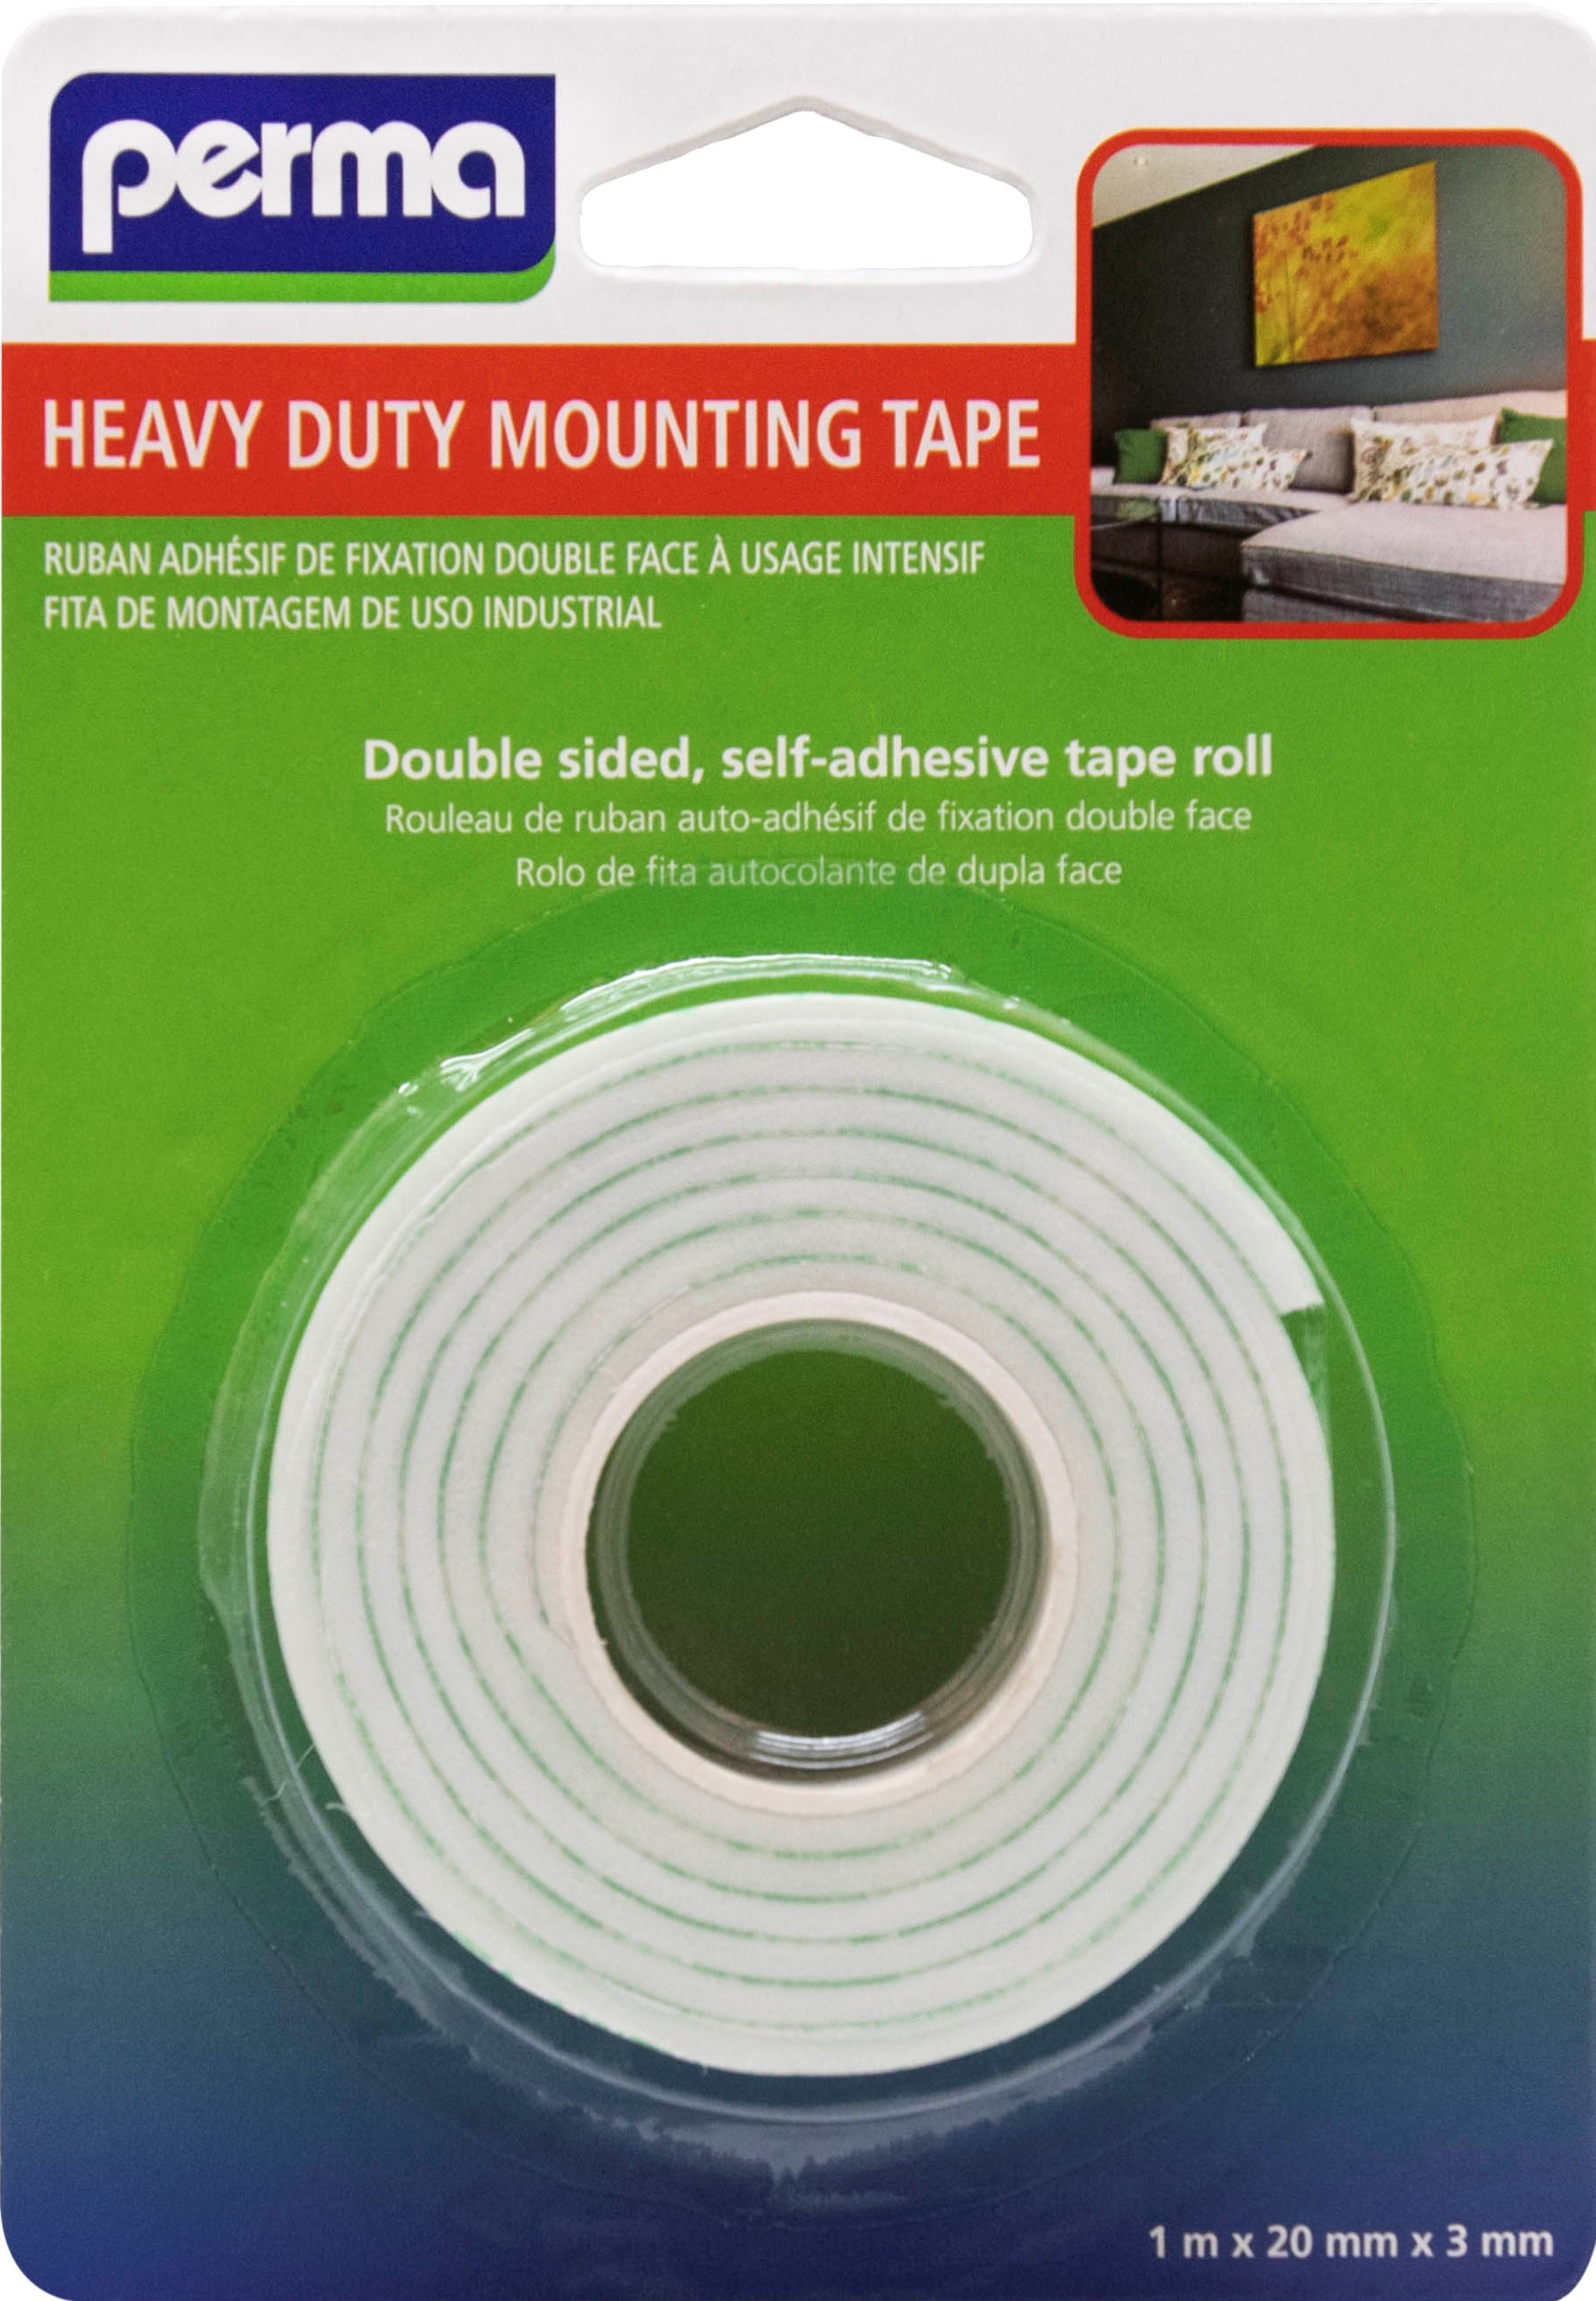 Wholesale 10M Heavy Duty Double Sided Tape For Car, Home, And